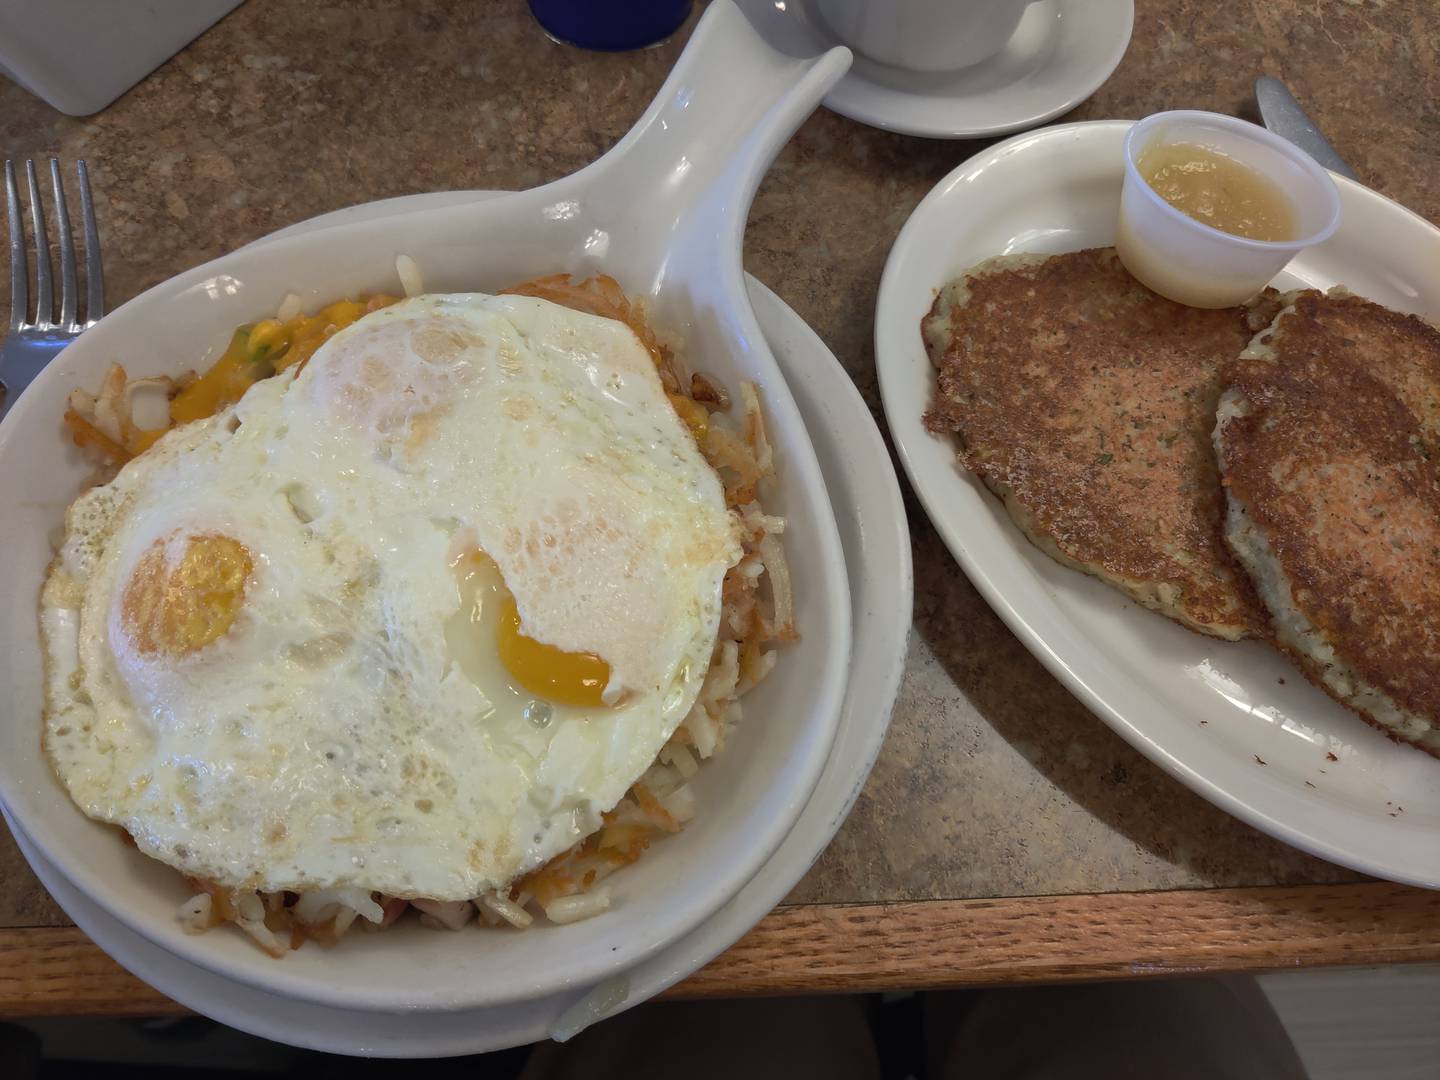 The Denver skillet with a side of potato pancakes at Briana's Pancake House Restaurant in Batavia.